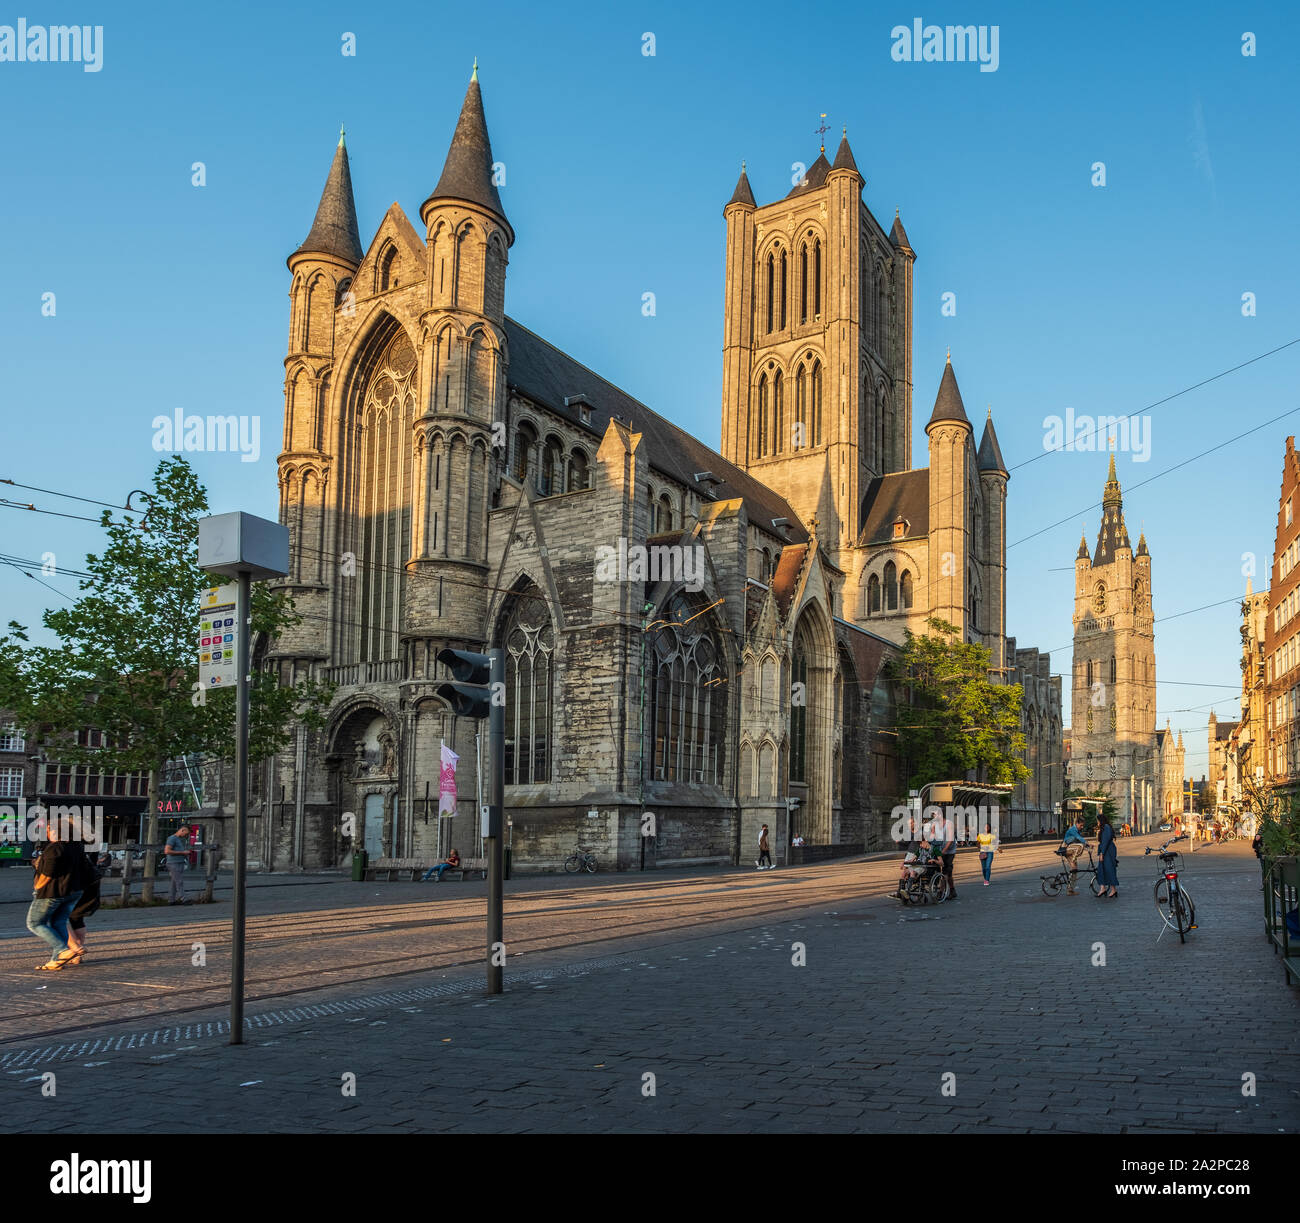 Saint Nicholas' Church and Belfry of Ghent at Corn Market during the afternoon. Historical center of Ghent, Flemish Region, Belgium, EU. Stock Photo